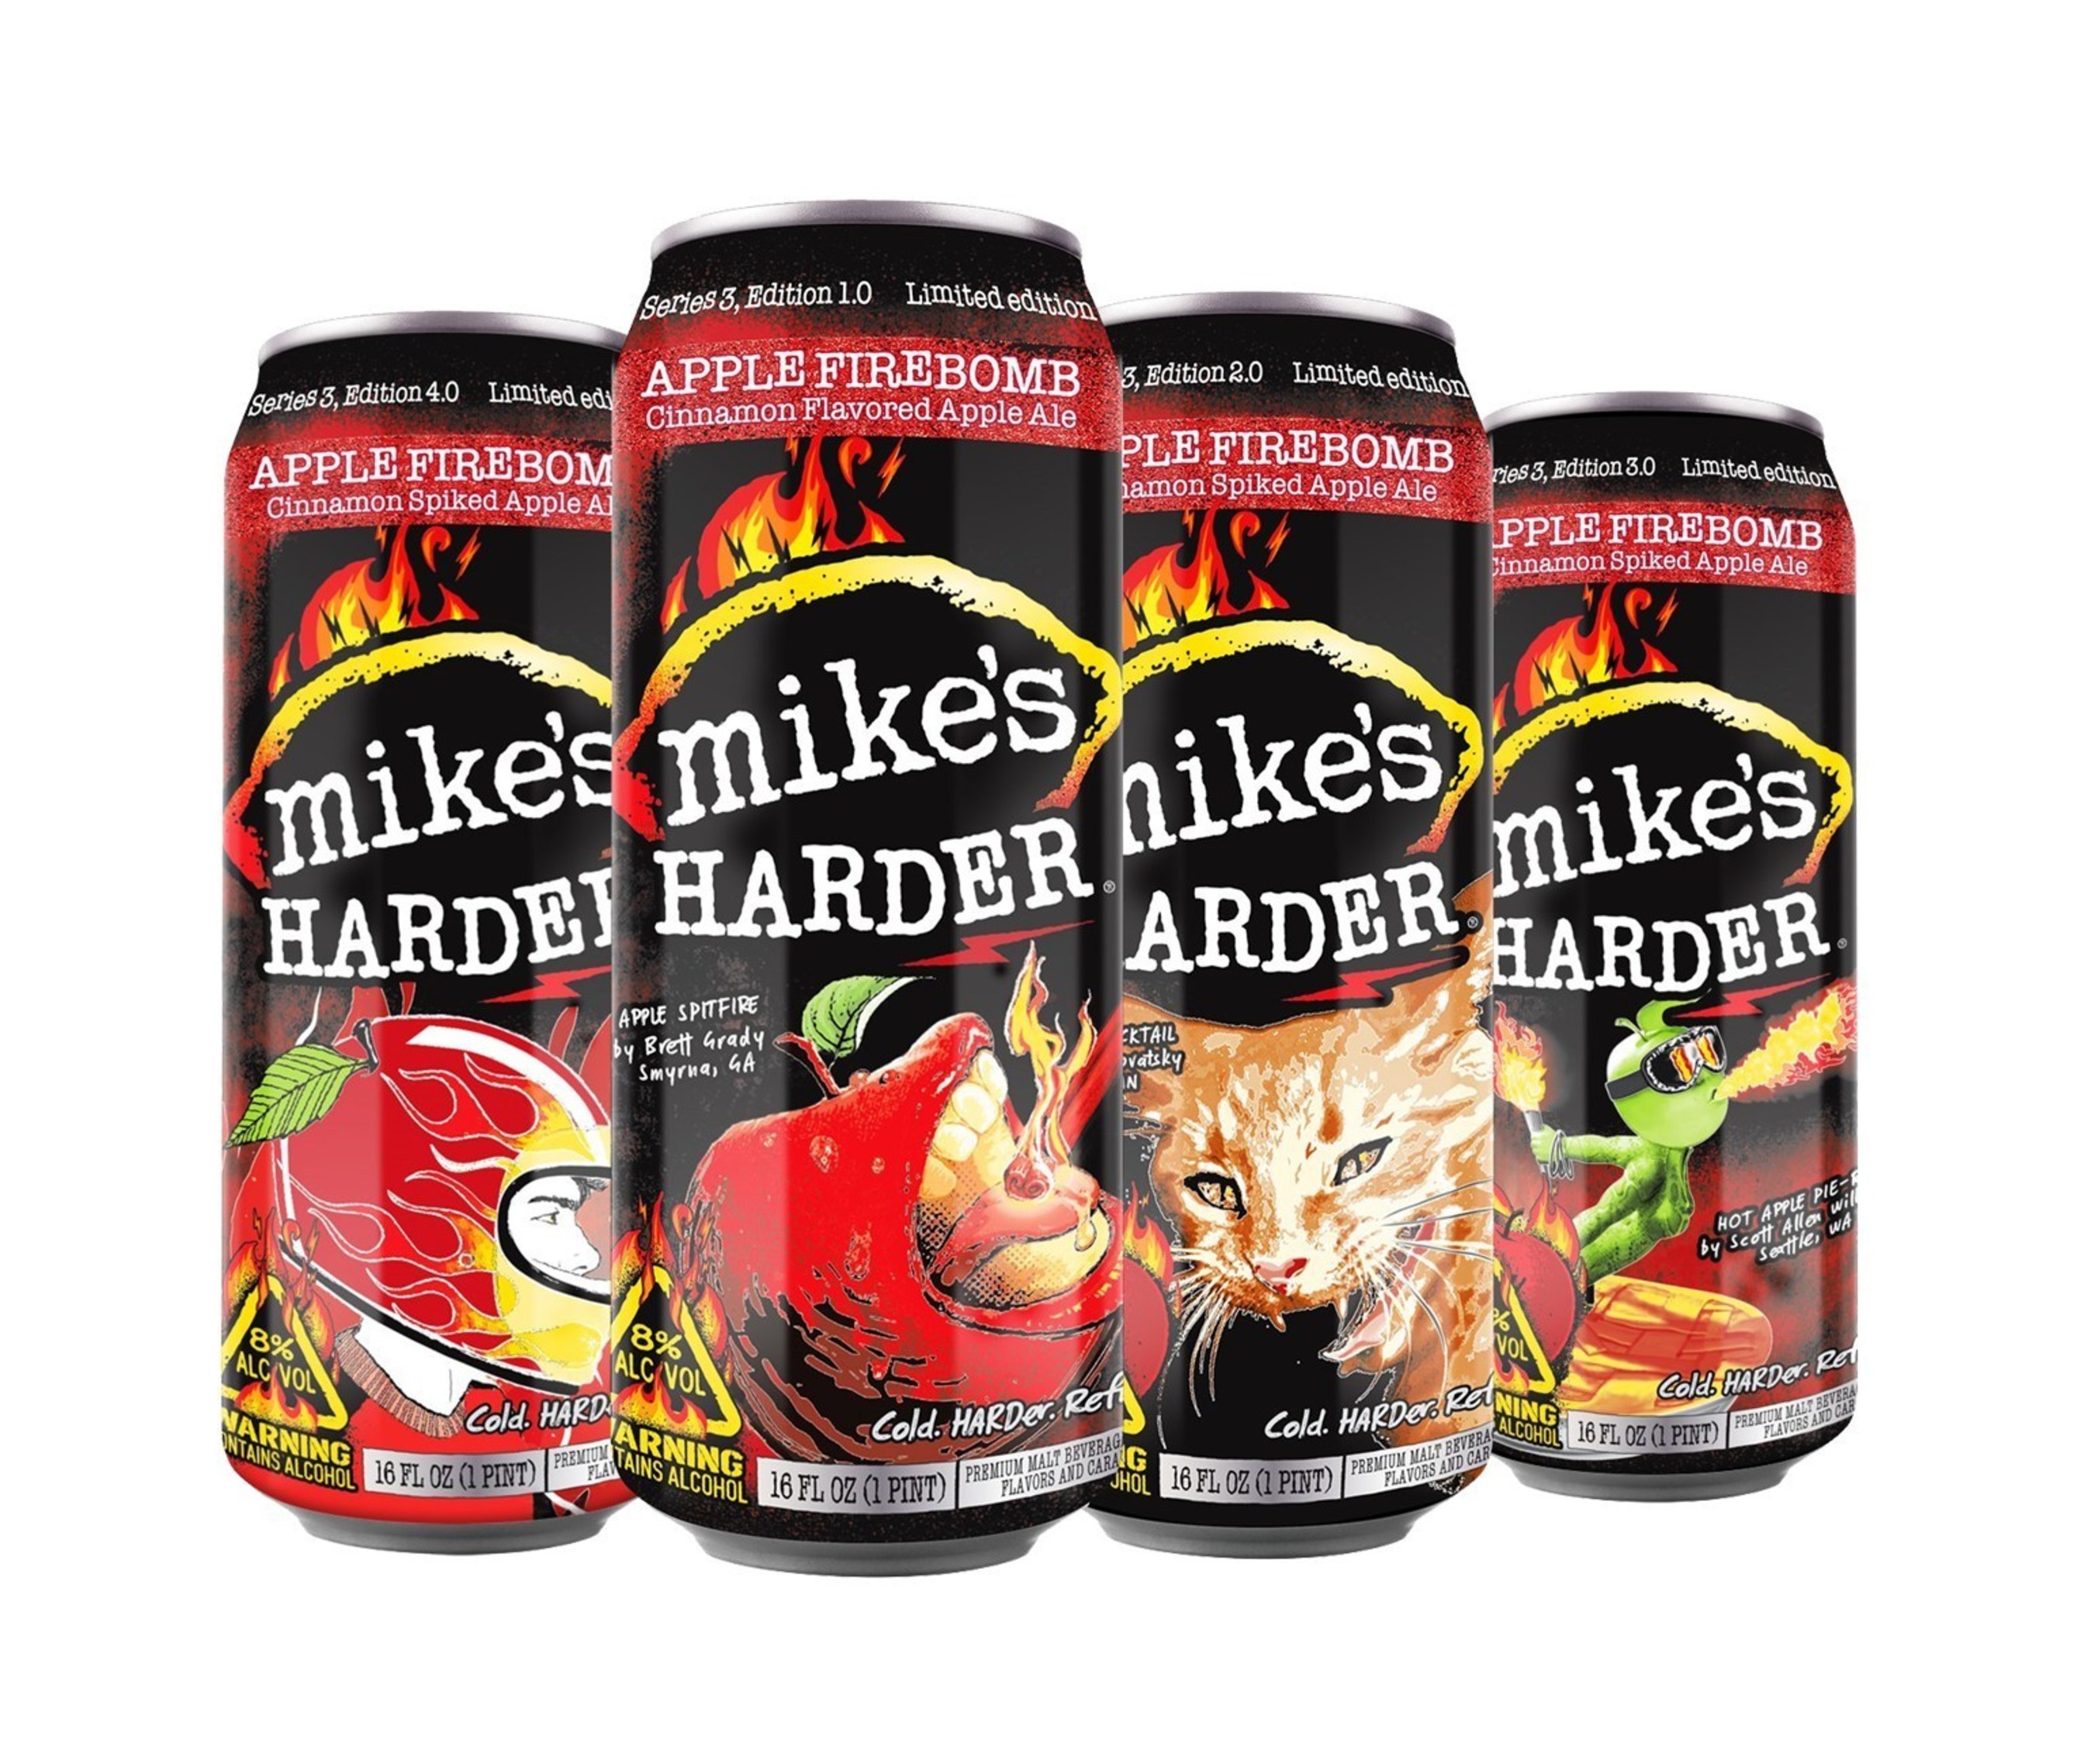 Combining the refreshment of a crisp apple ale with red hot cinnamon and 8% ABV, the new mike's HARDER Apple Firebomb flavor has been brought to life in four contest-winning designs conceived, named and chosen by HARDER fans: Apple Spitfire, Mad Kitty Cocktail, Hot Apple Pi-Ro and Red Hot Apple.